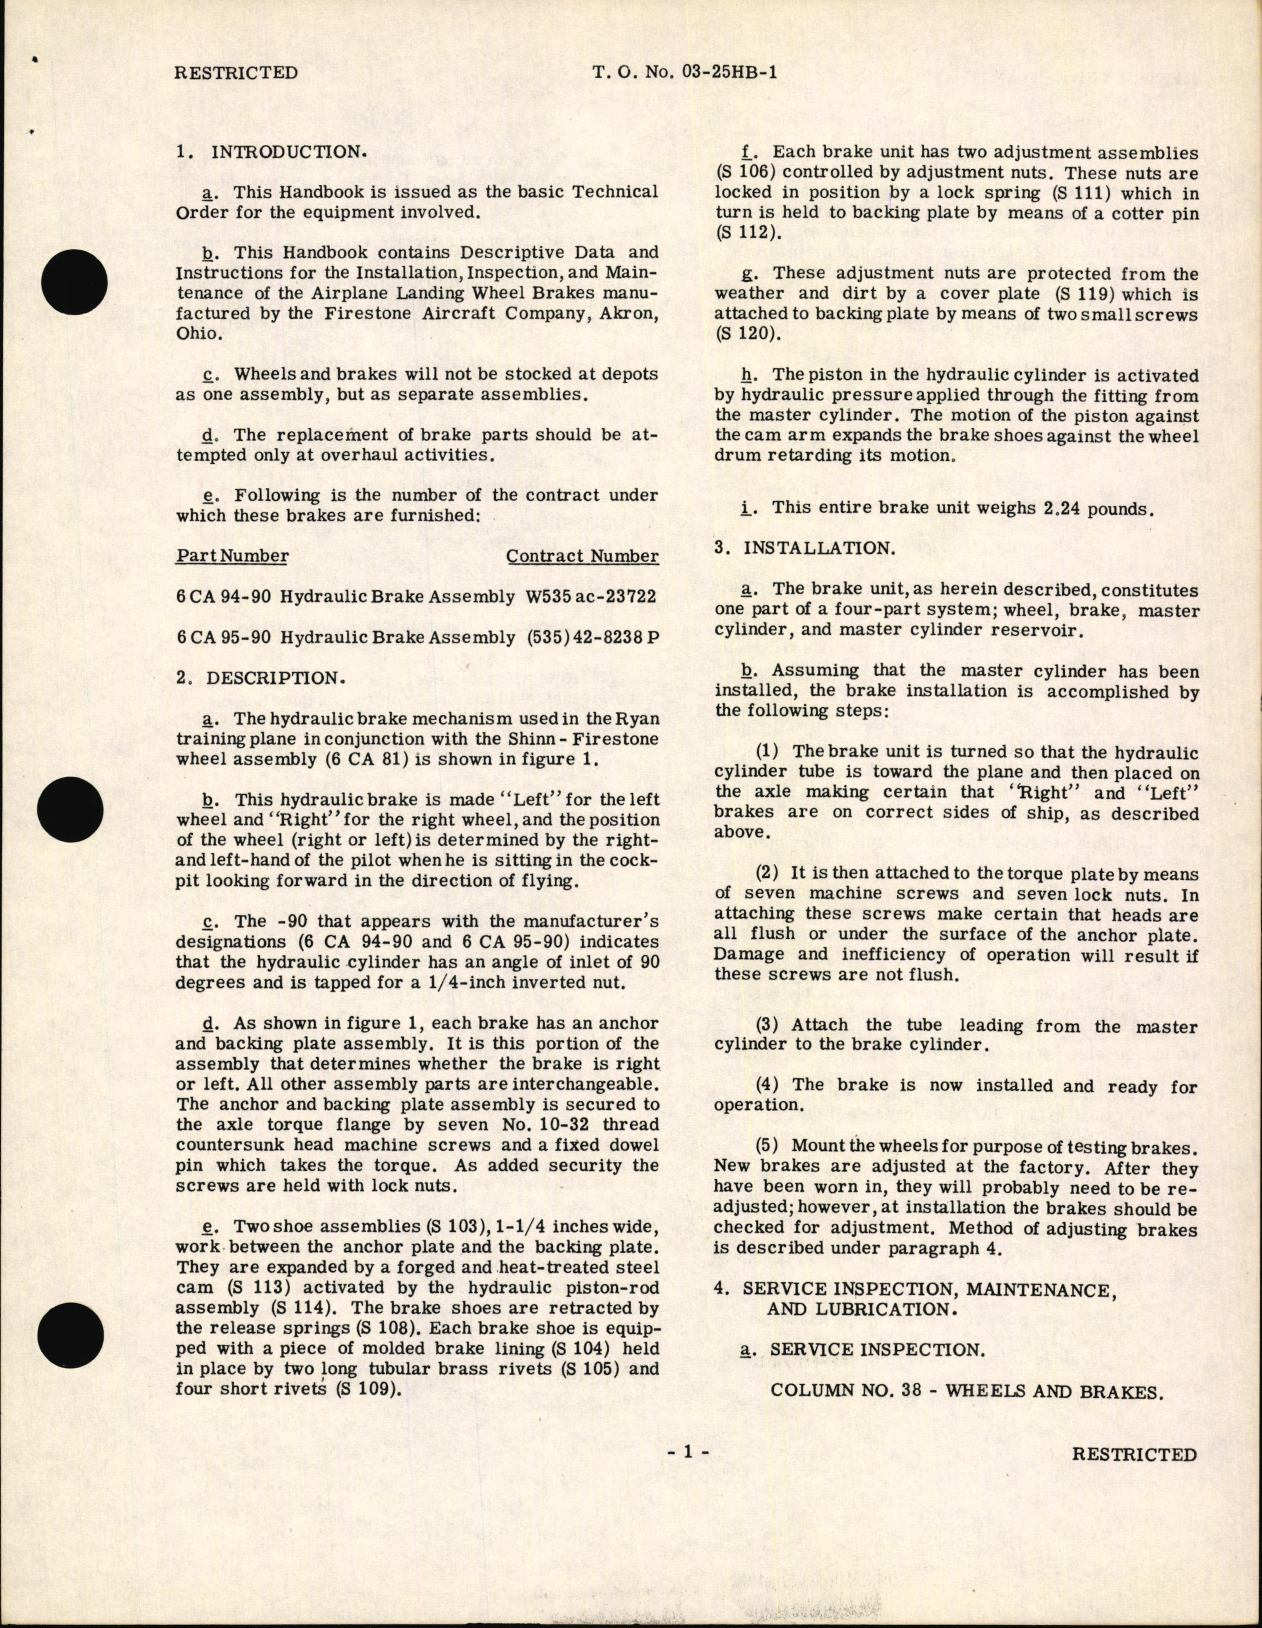 Sample page 5 from AirCorps Library document: Handbook of Instructions for Model 6 CA 94-90 and 6 CA 95-90 Hydraulic Brake Assembly